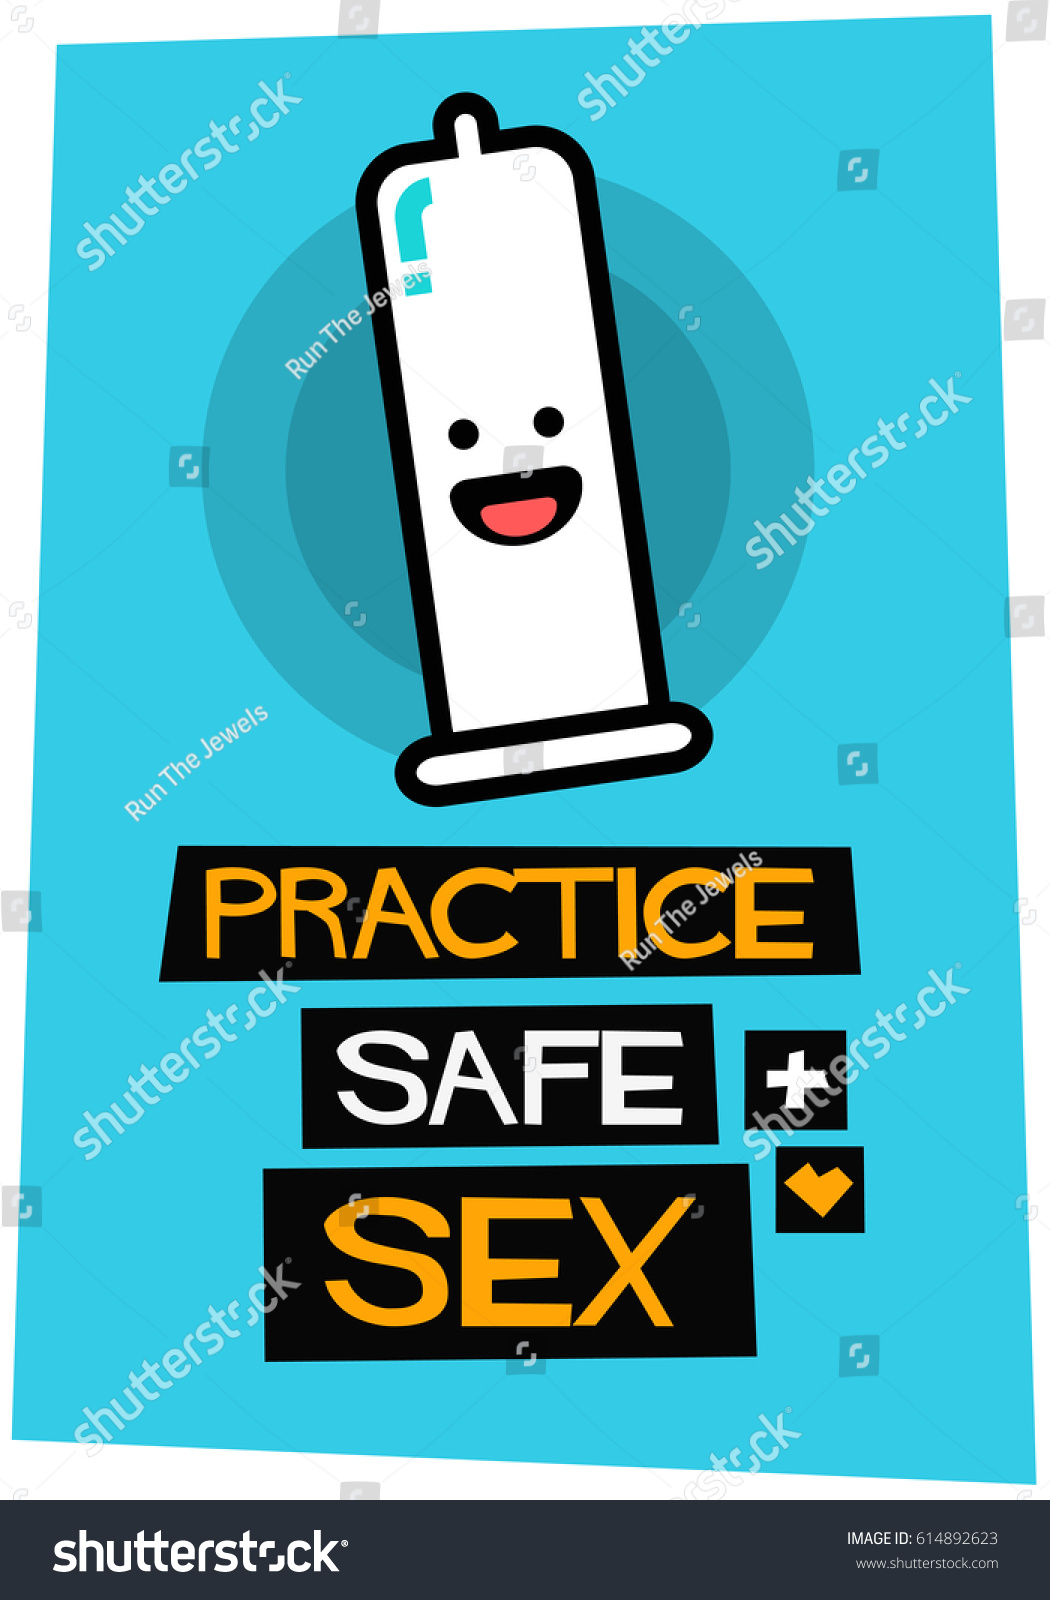 Practice Safe Sex Sexual Health Poster Stock Vector Royalty Free 614892623 Shutterstock